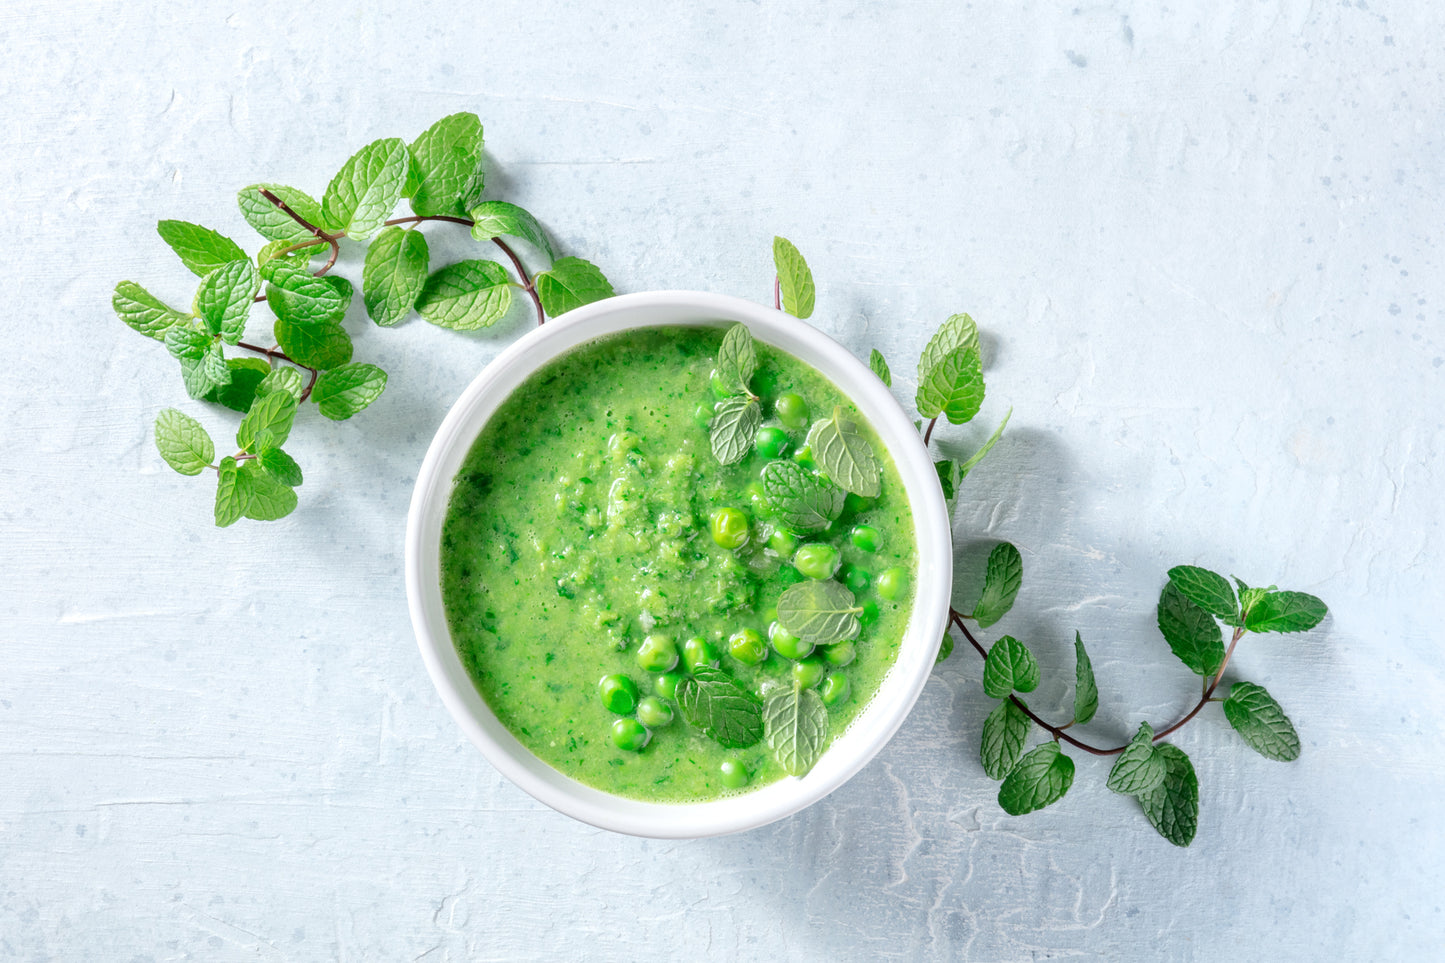 Minted Pea Soup 